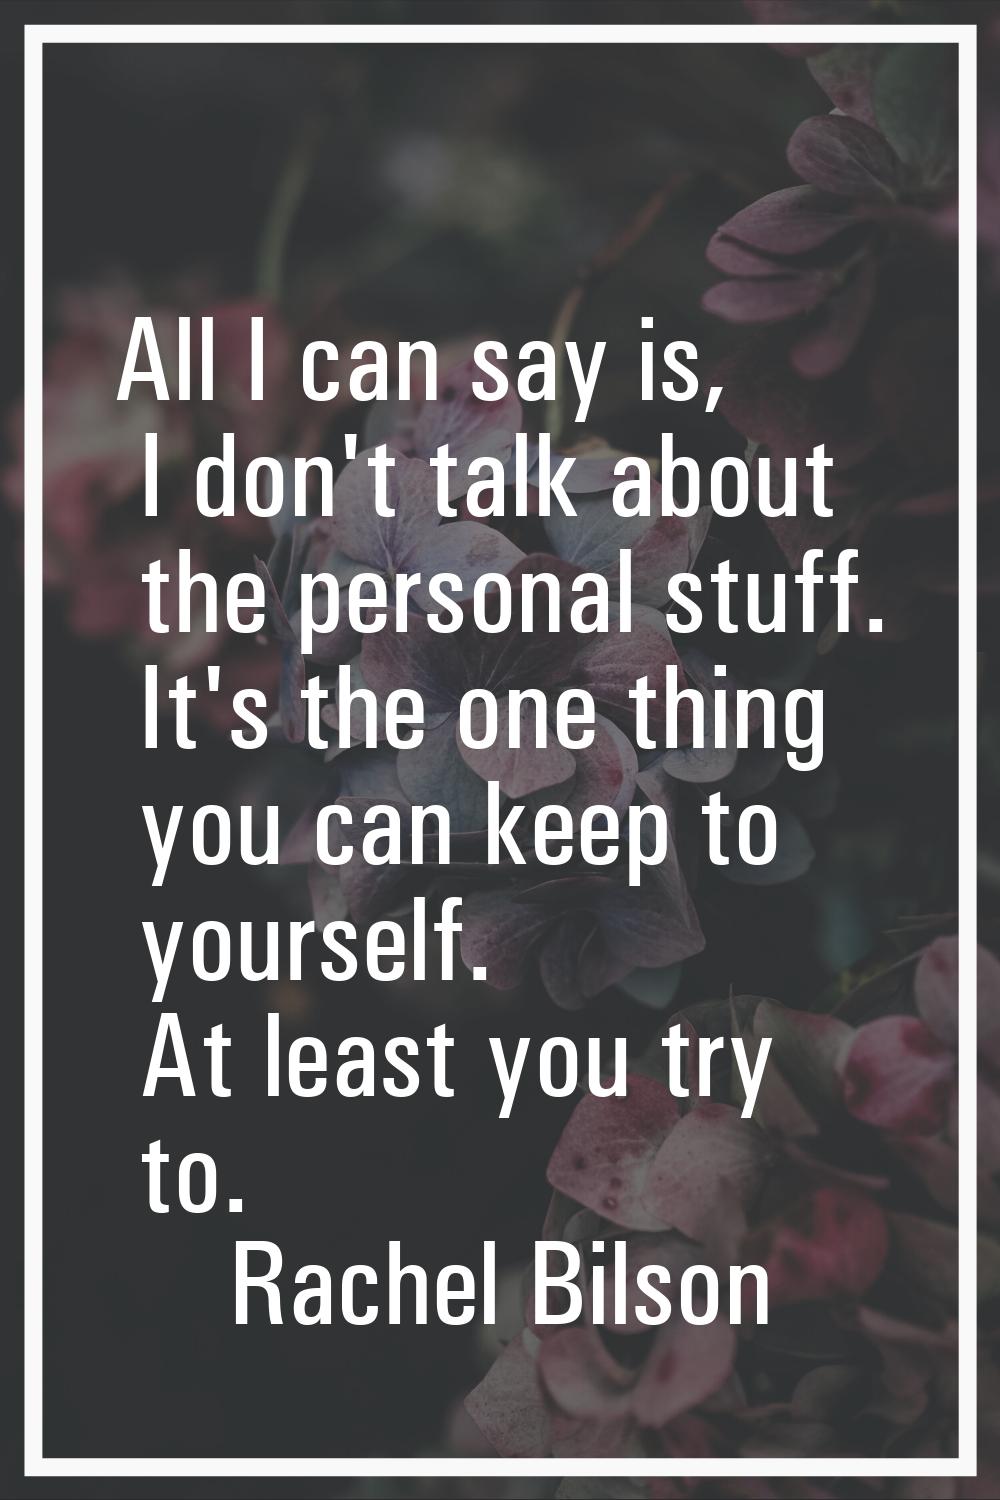 All I can say is, I don't talk about the personal stuff. It's the one thing you can keep to yoursel